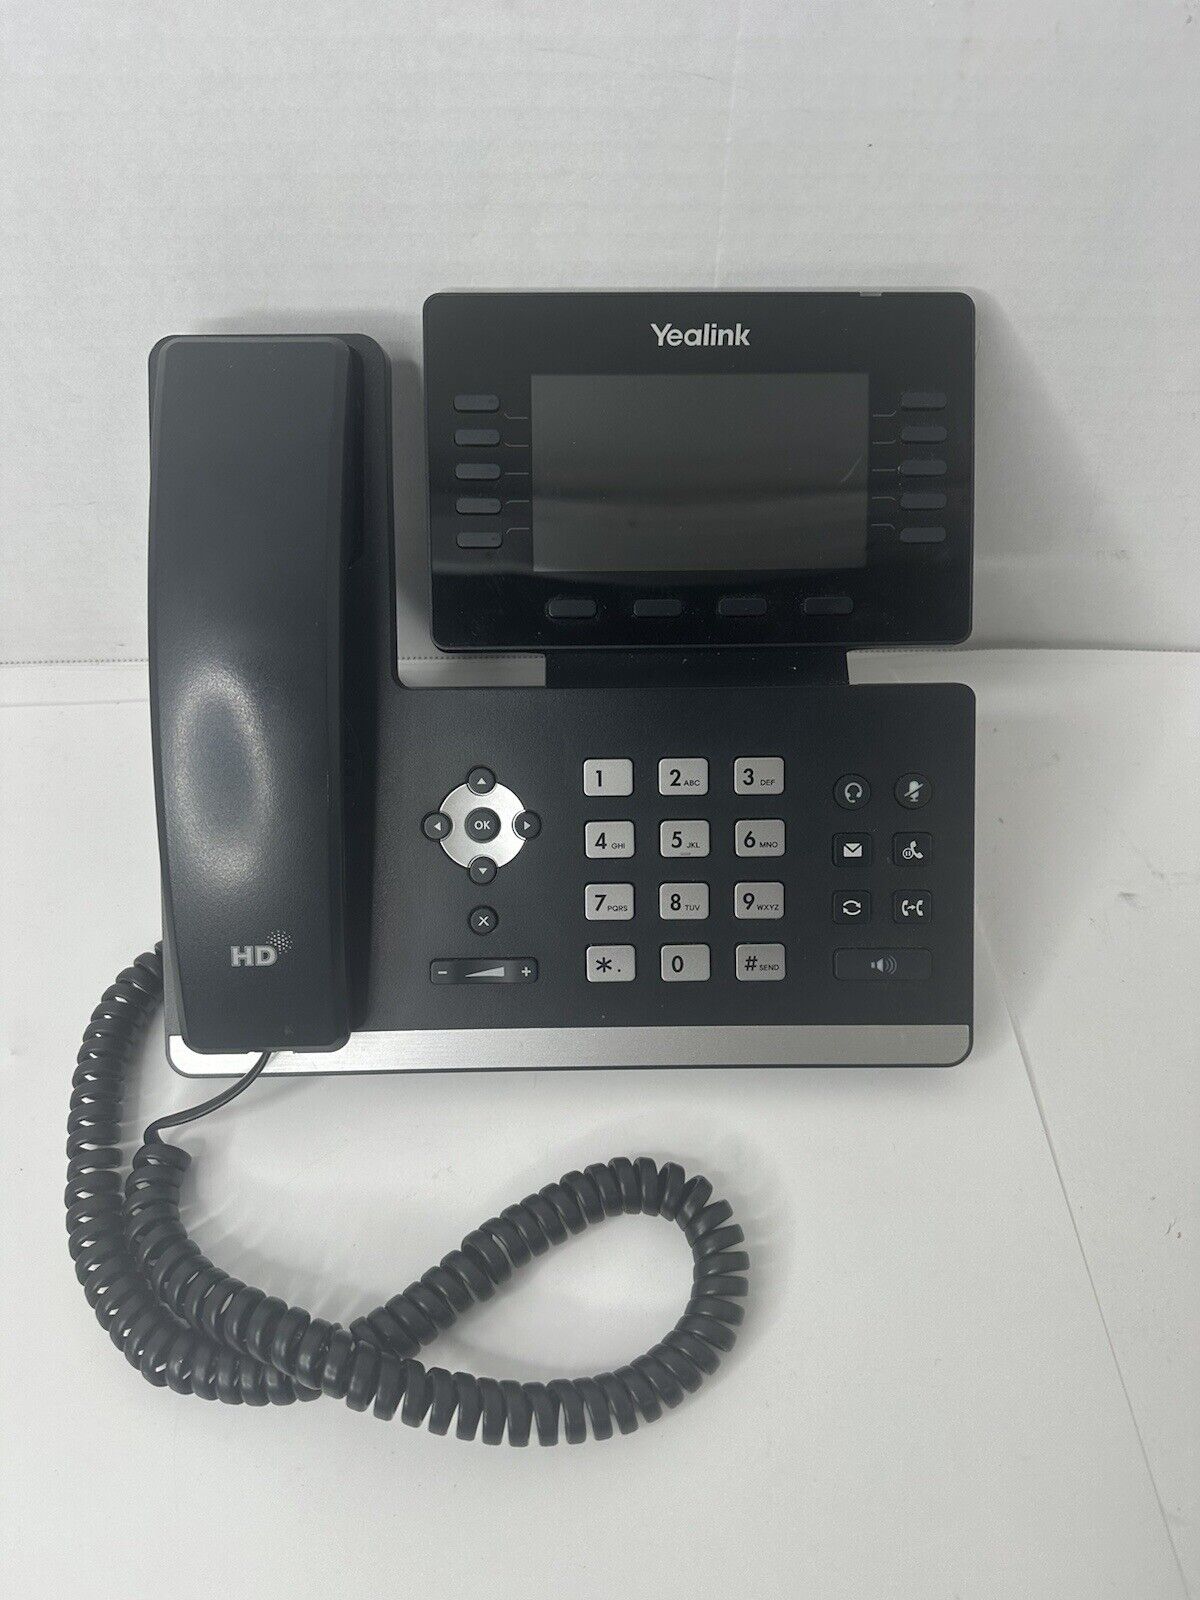 Yealink SIP-T54W Prime Business IP Phone Tested/ No Power Cord